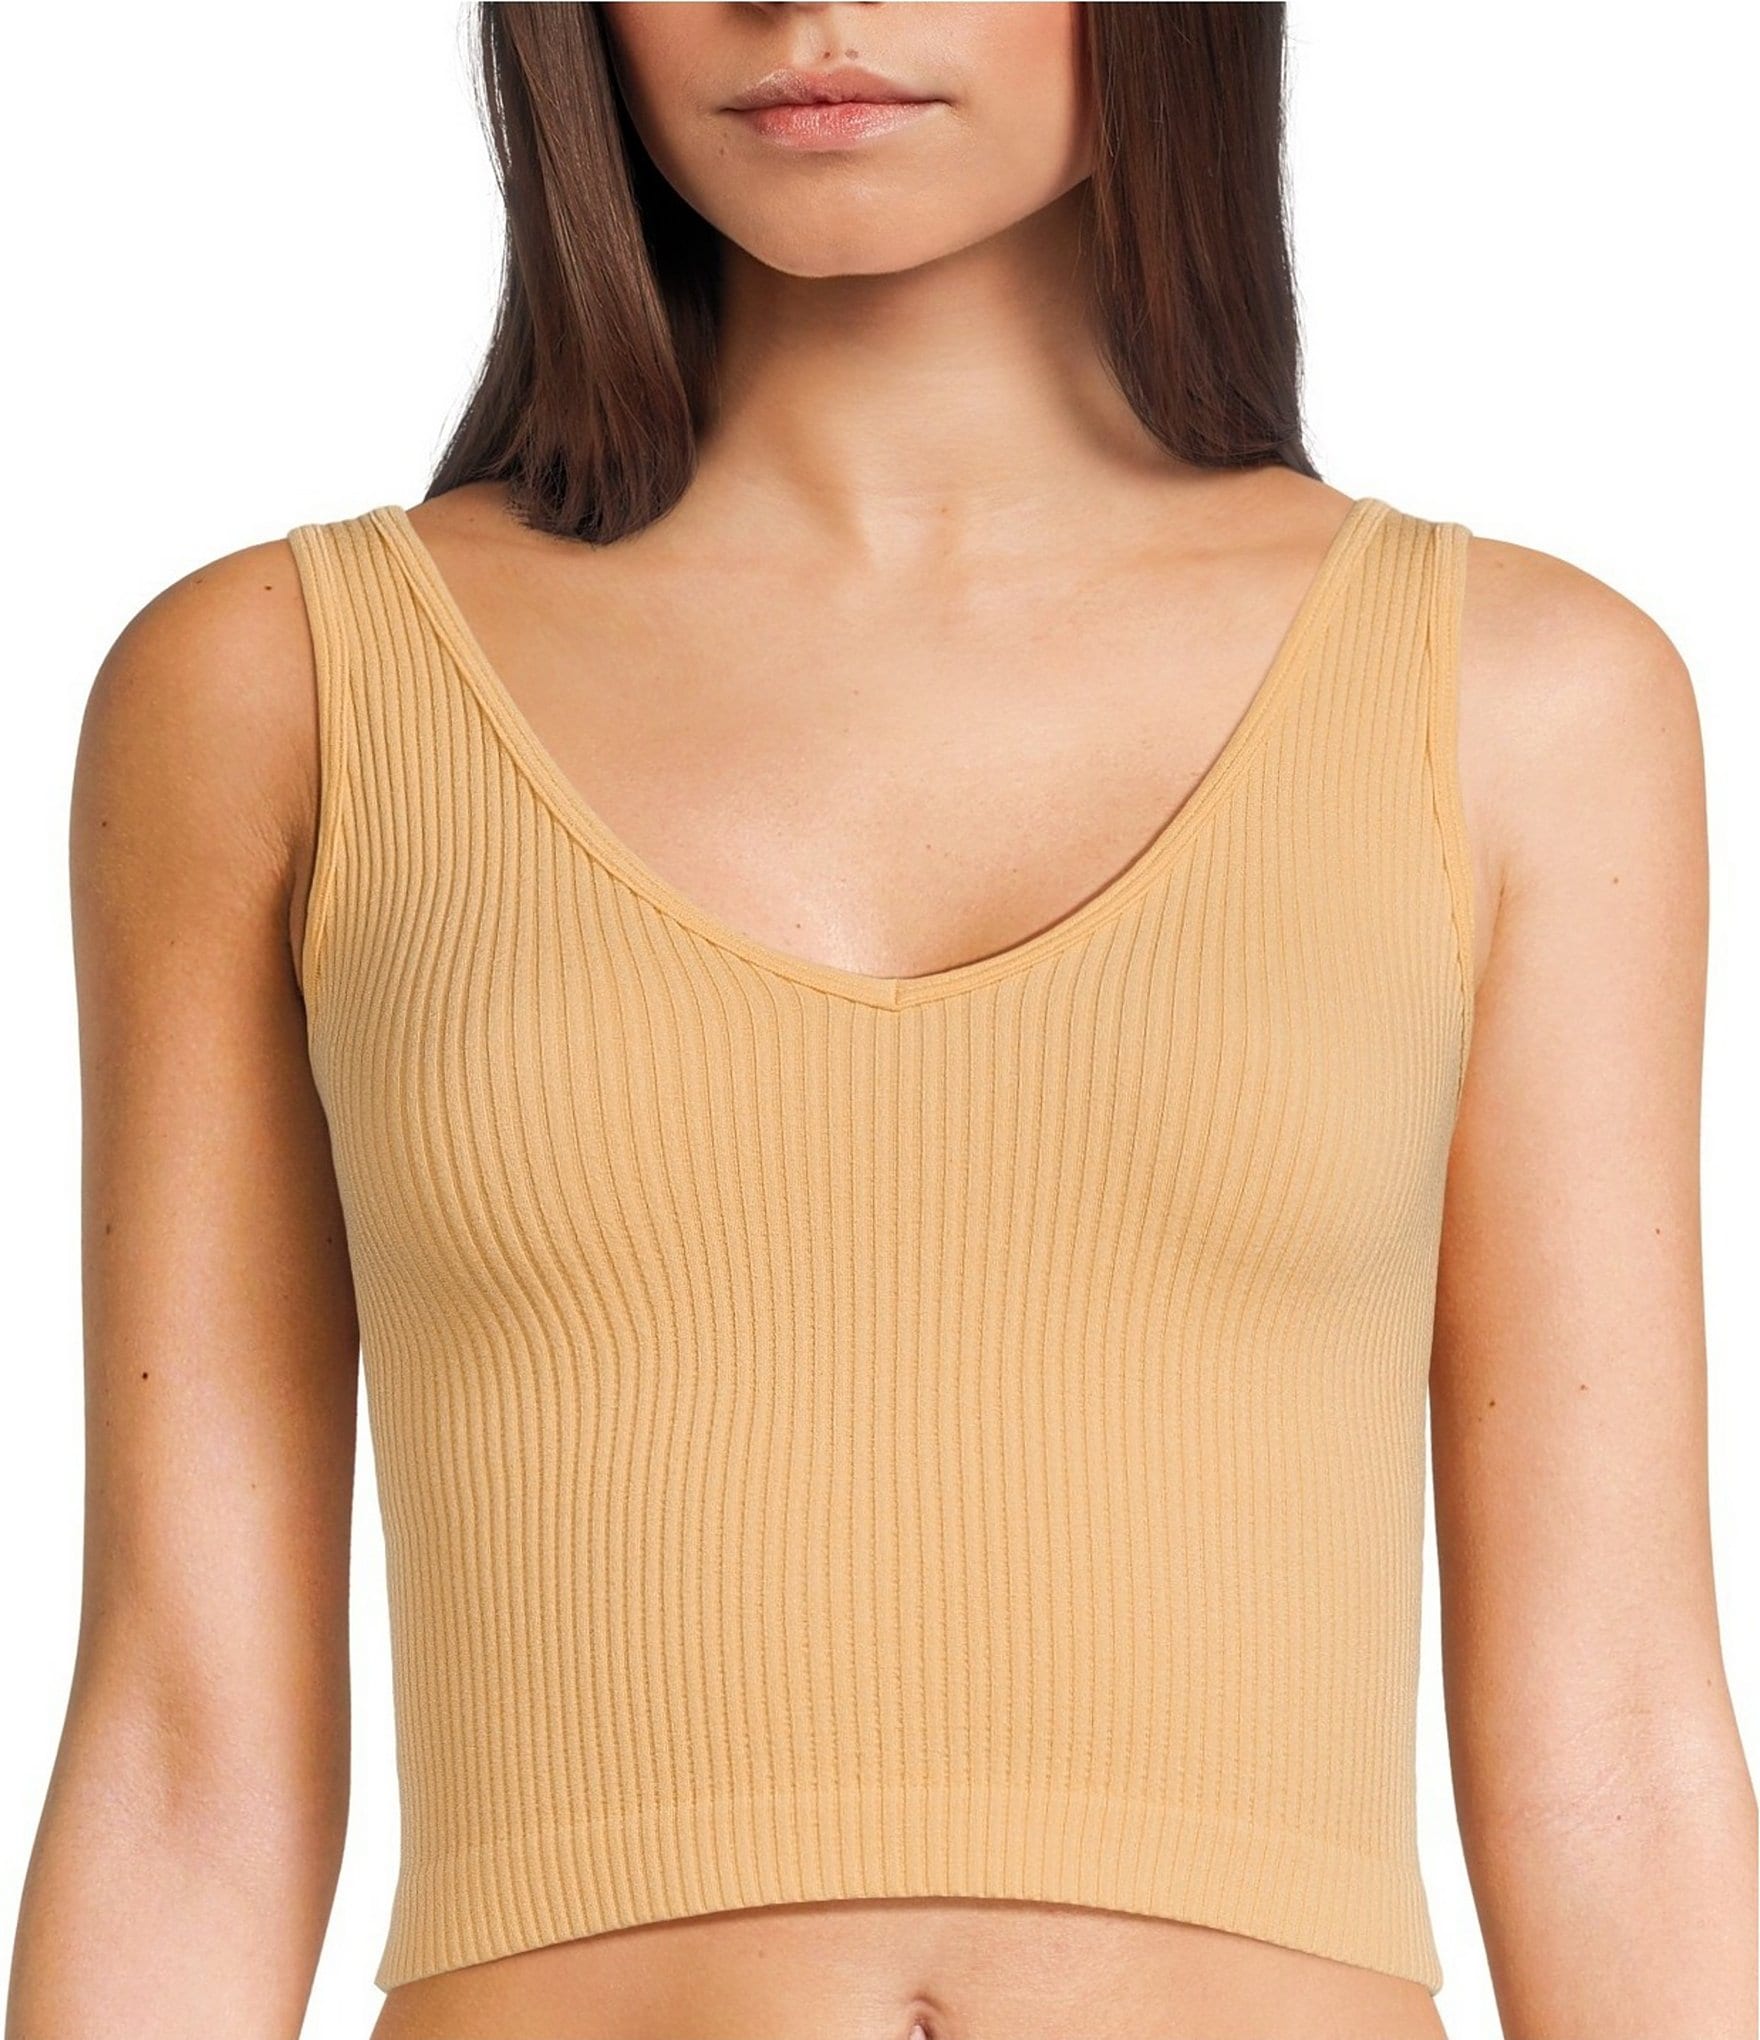 Free People Solid Rib Brami Yoga Crop Top, 31 Affordable Workout Clothes  Every Hot Yoga Enthusiast Needs, All Under $50